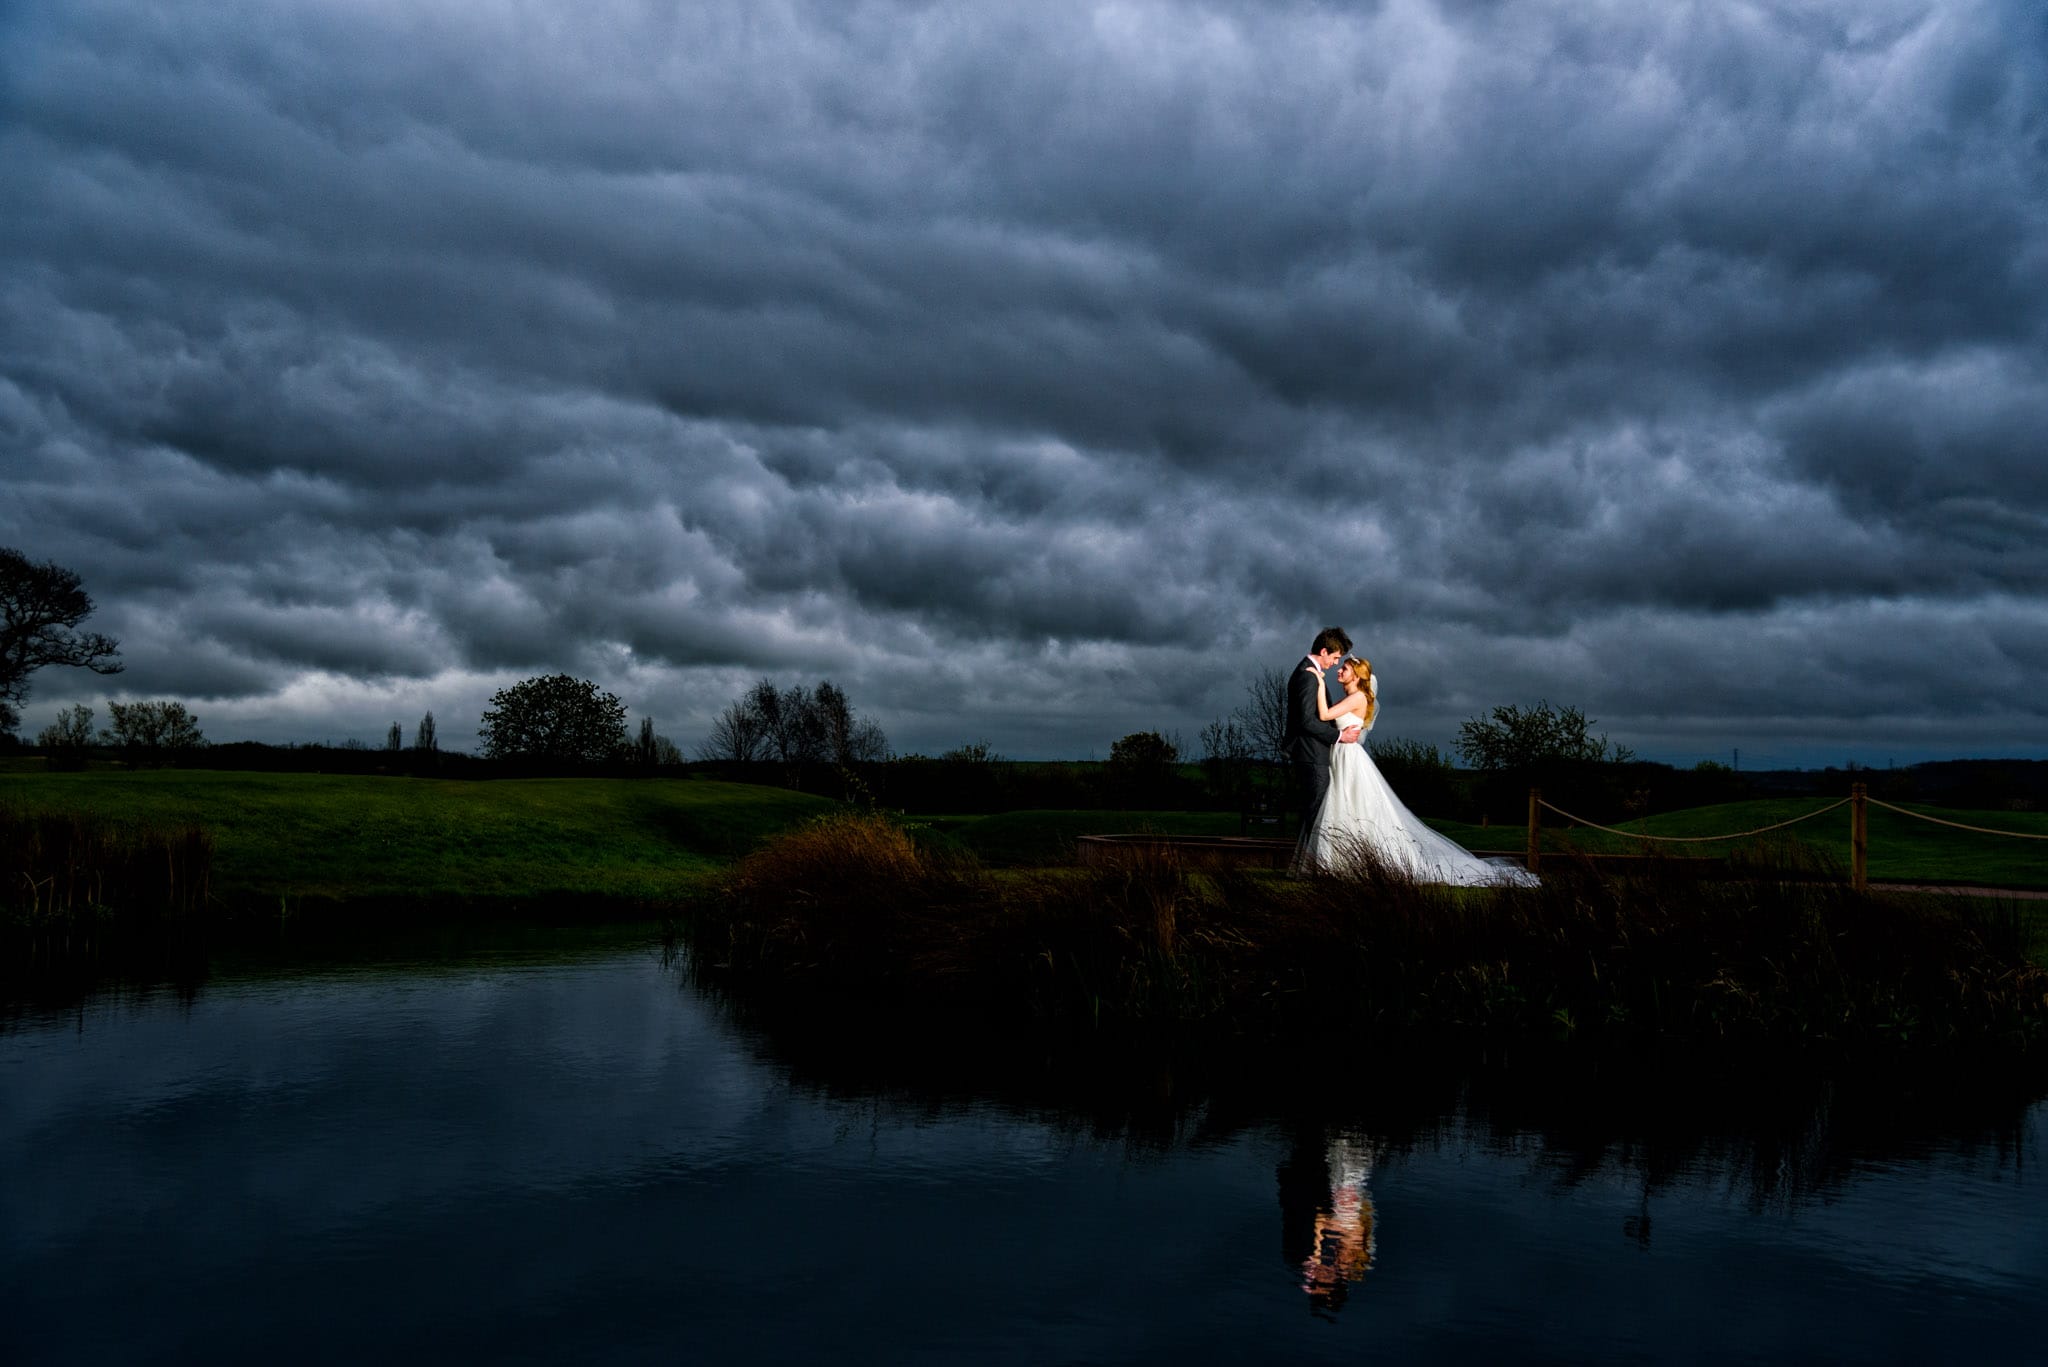 Bride & Groom at a rainy wedding at The Nottinghamshire